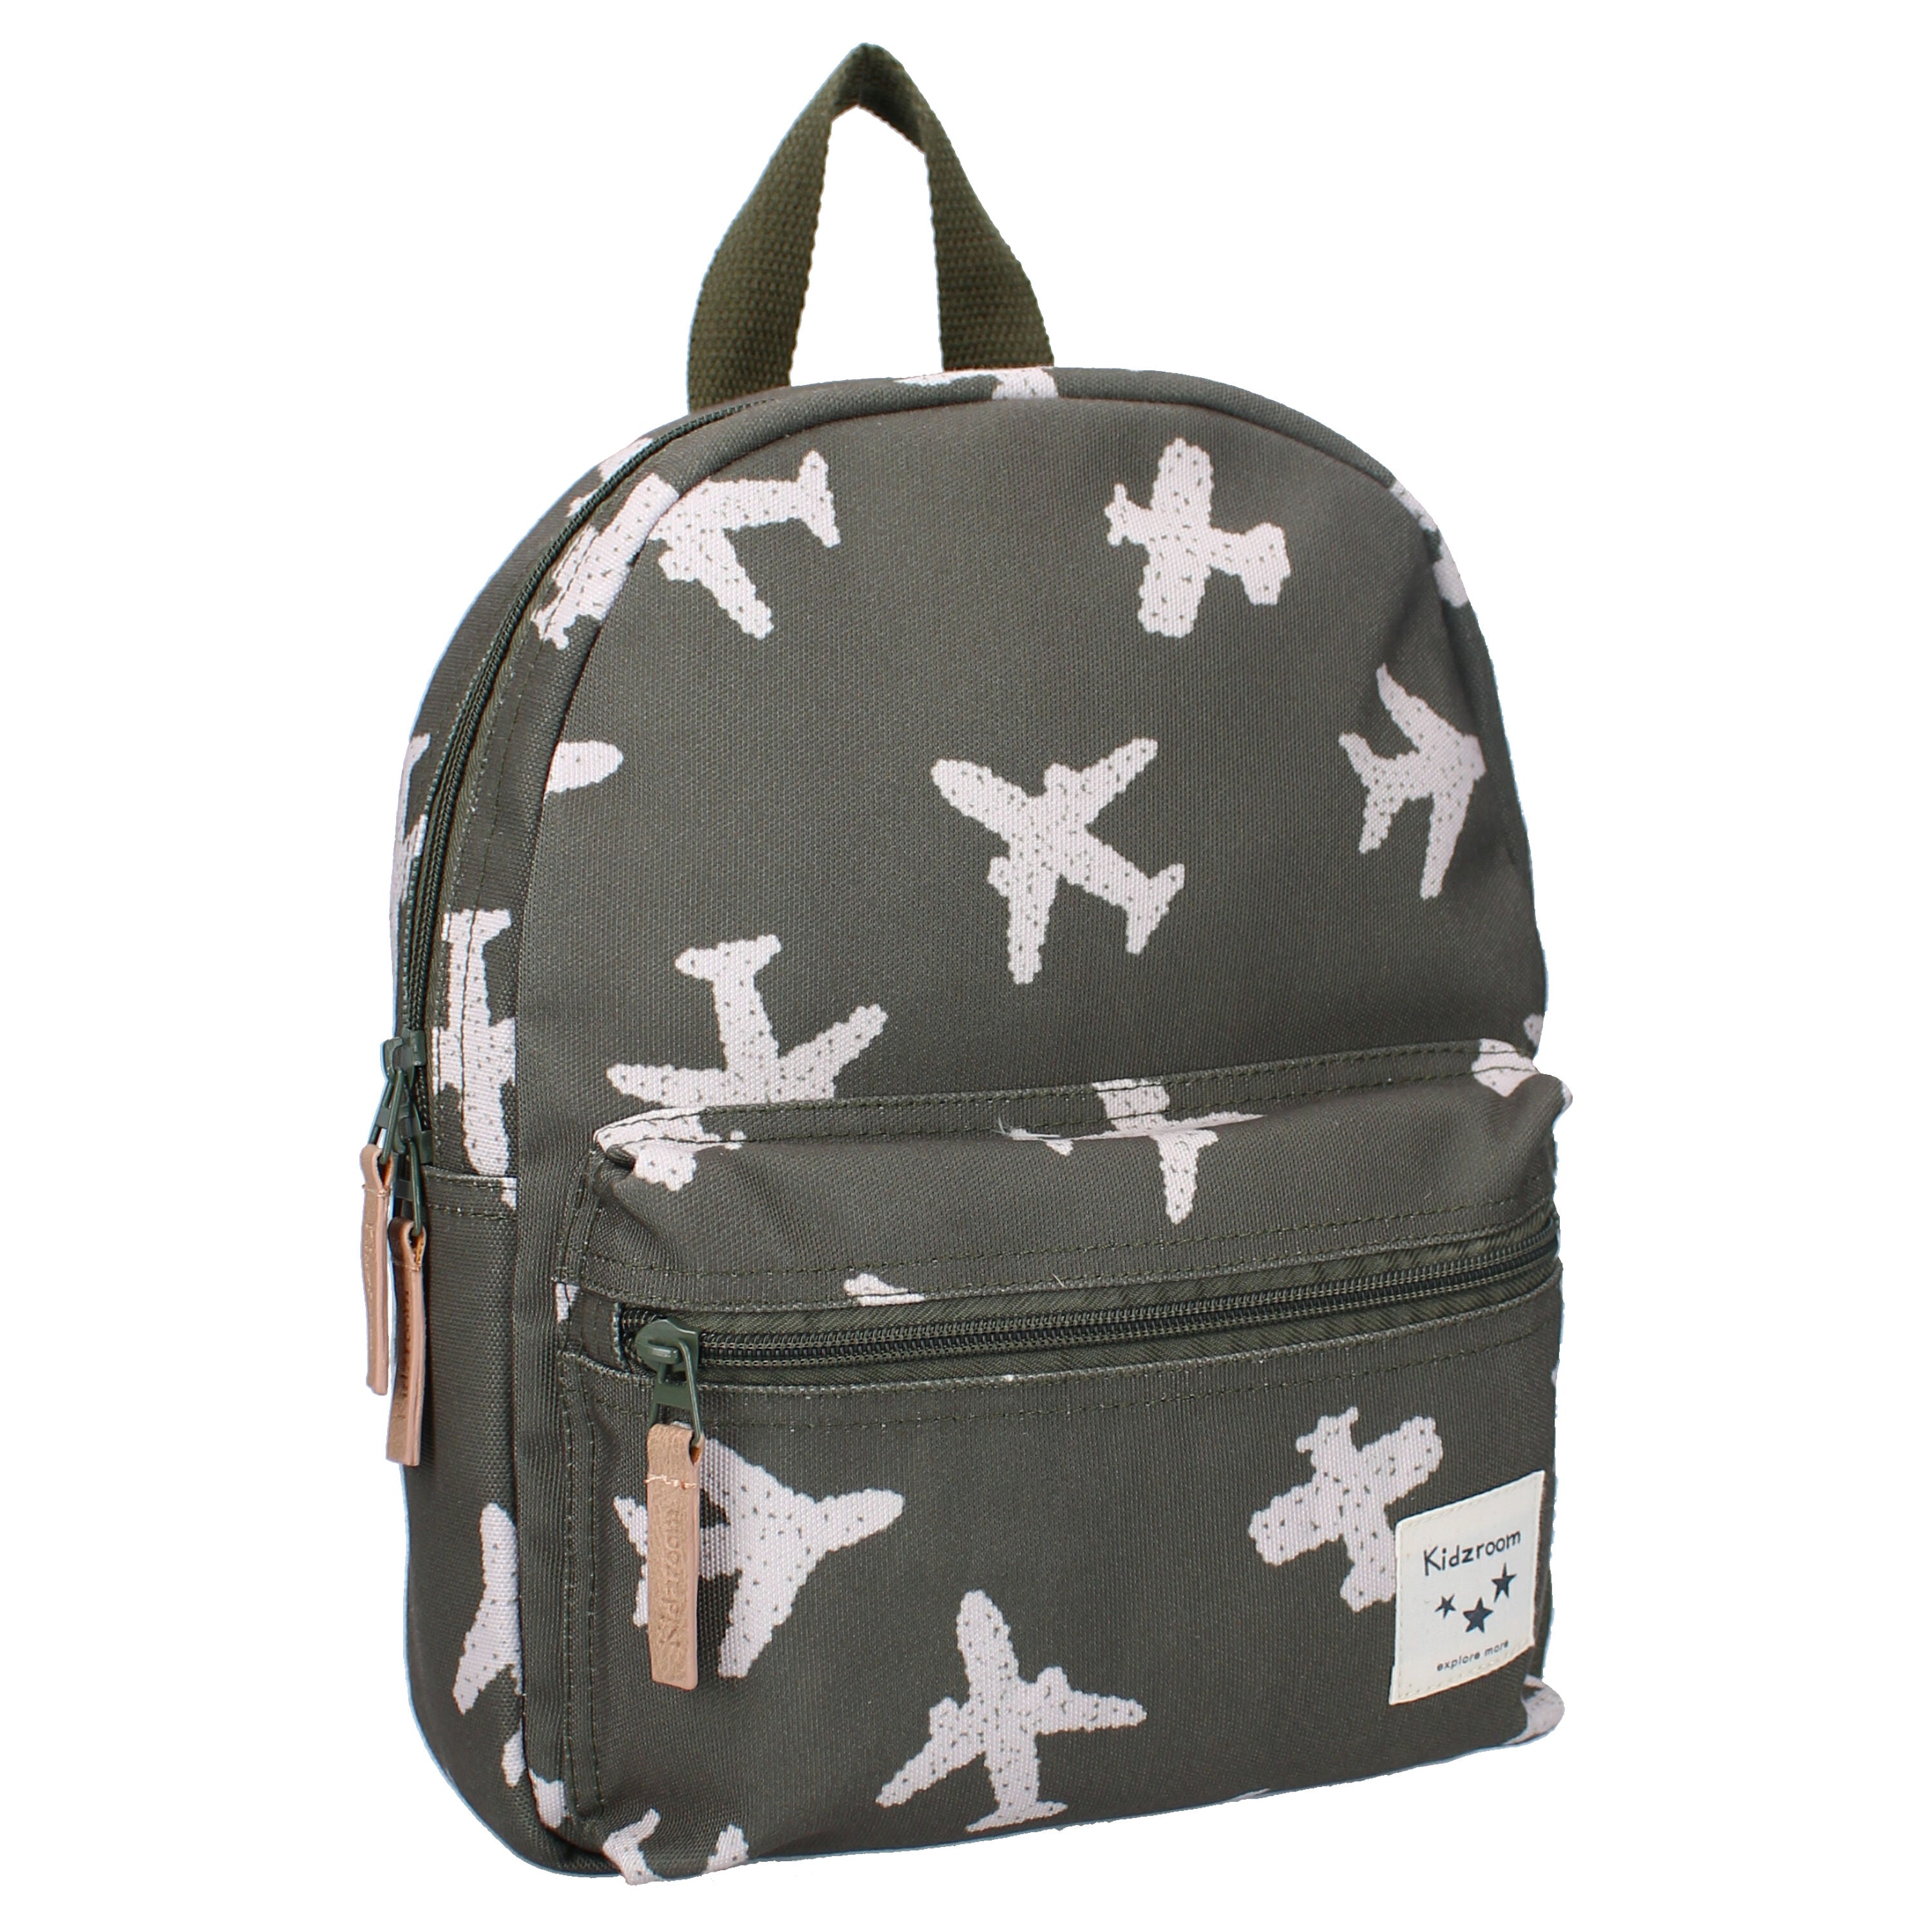 Kidzroom Backpack Adore More army